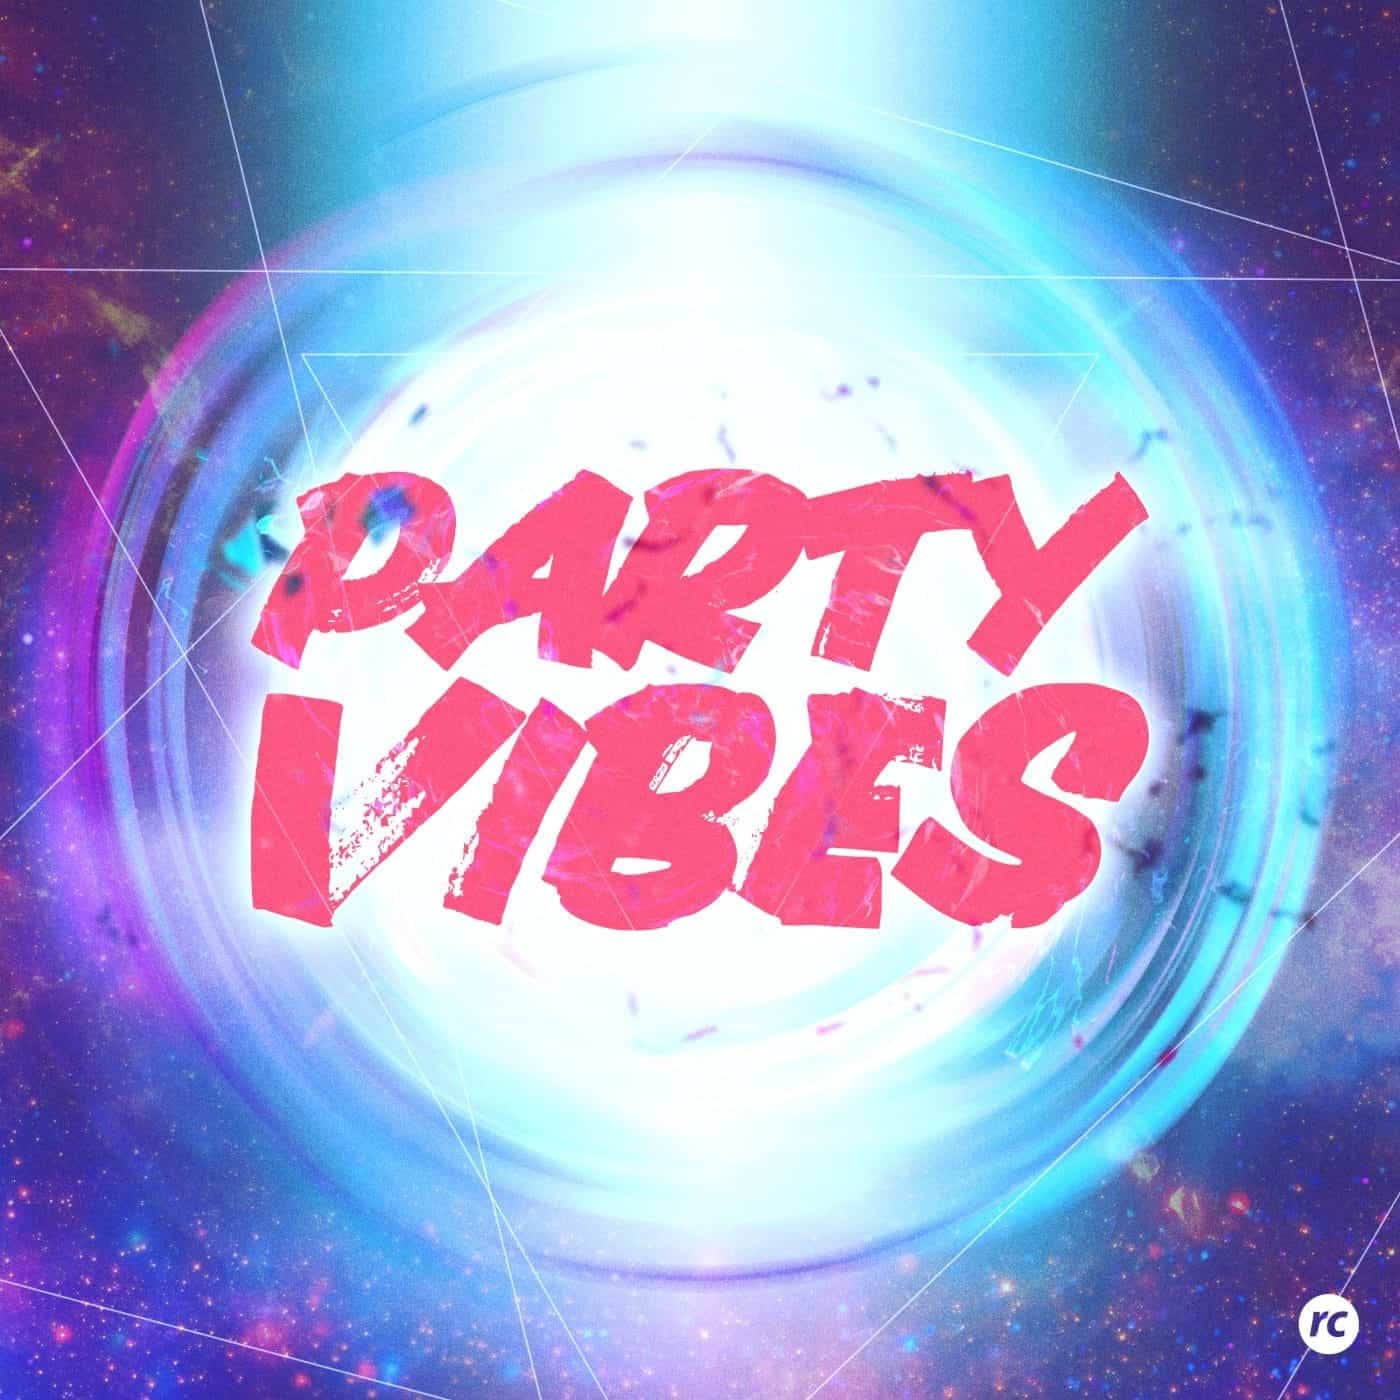 Dj Blue - Party Vibes feat Nicky B